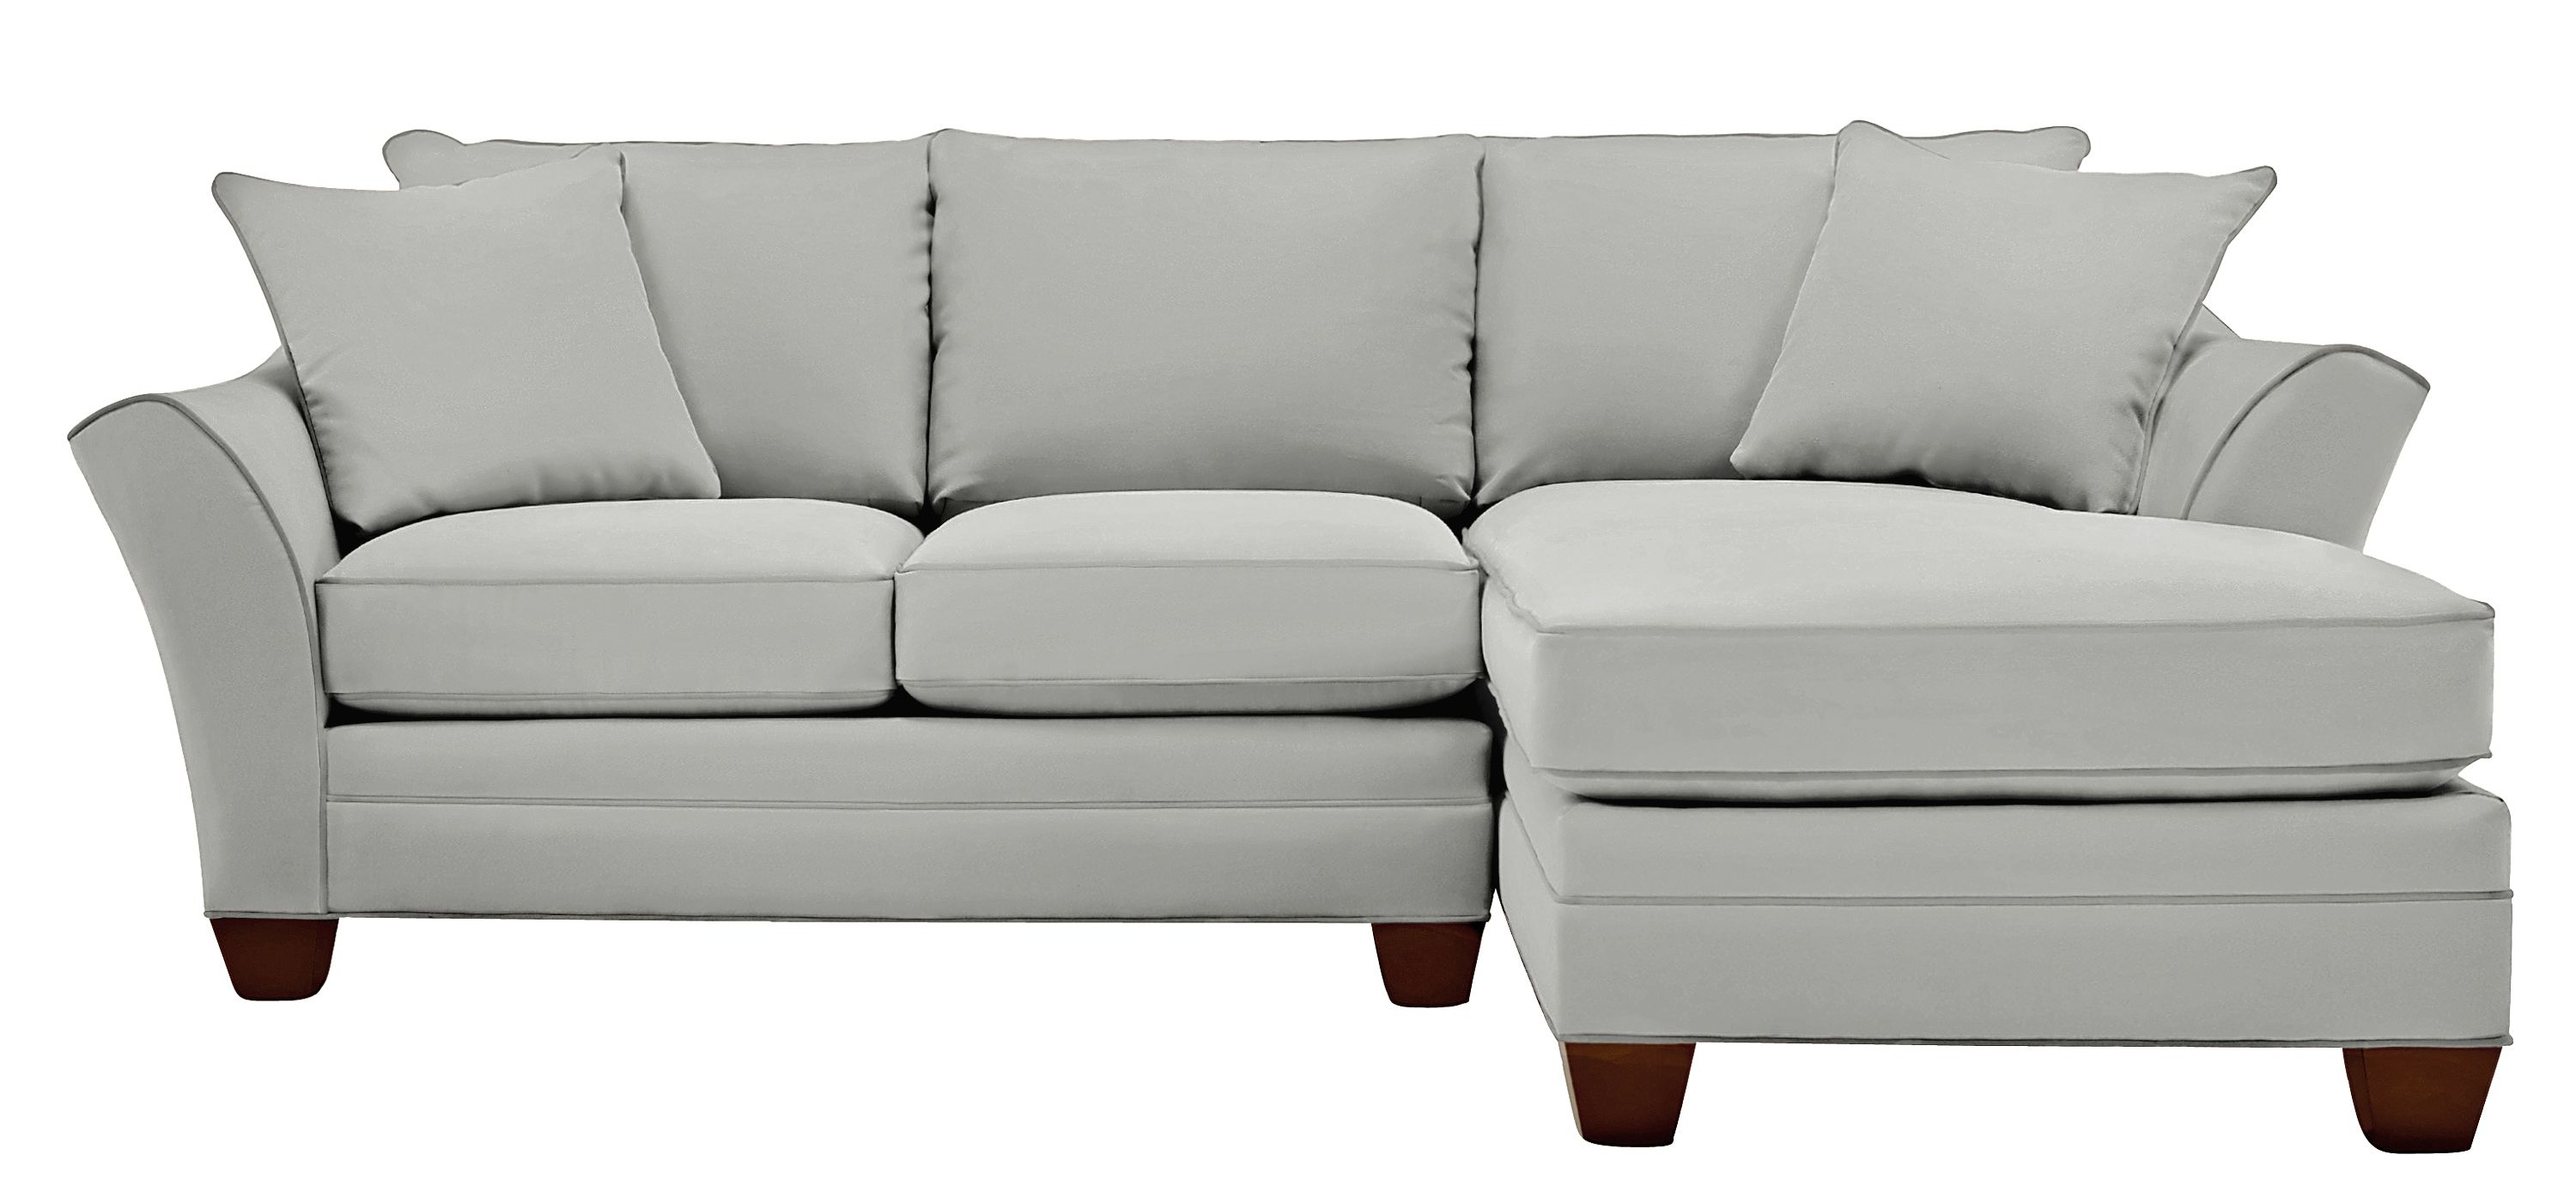 Foresthill 2-pc. Right Hand Facing Sectional Sofa